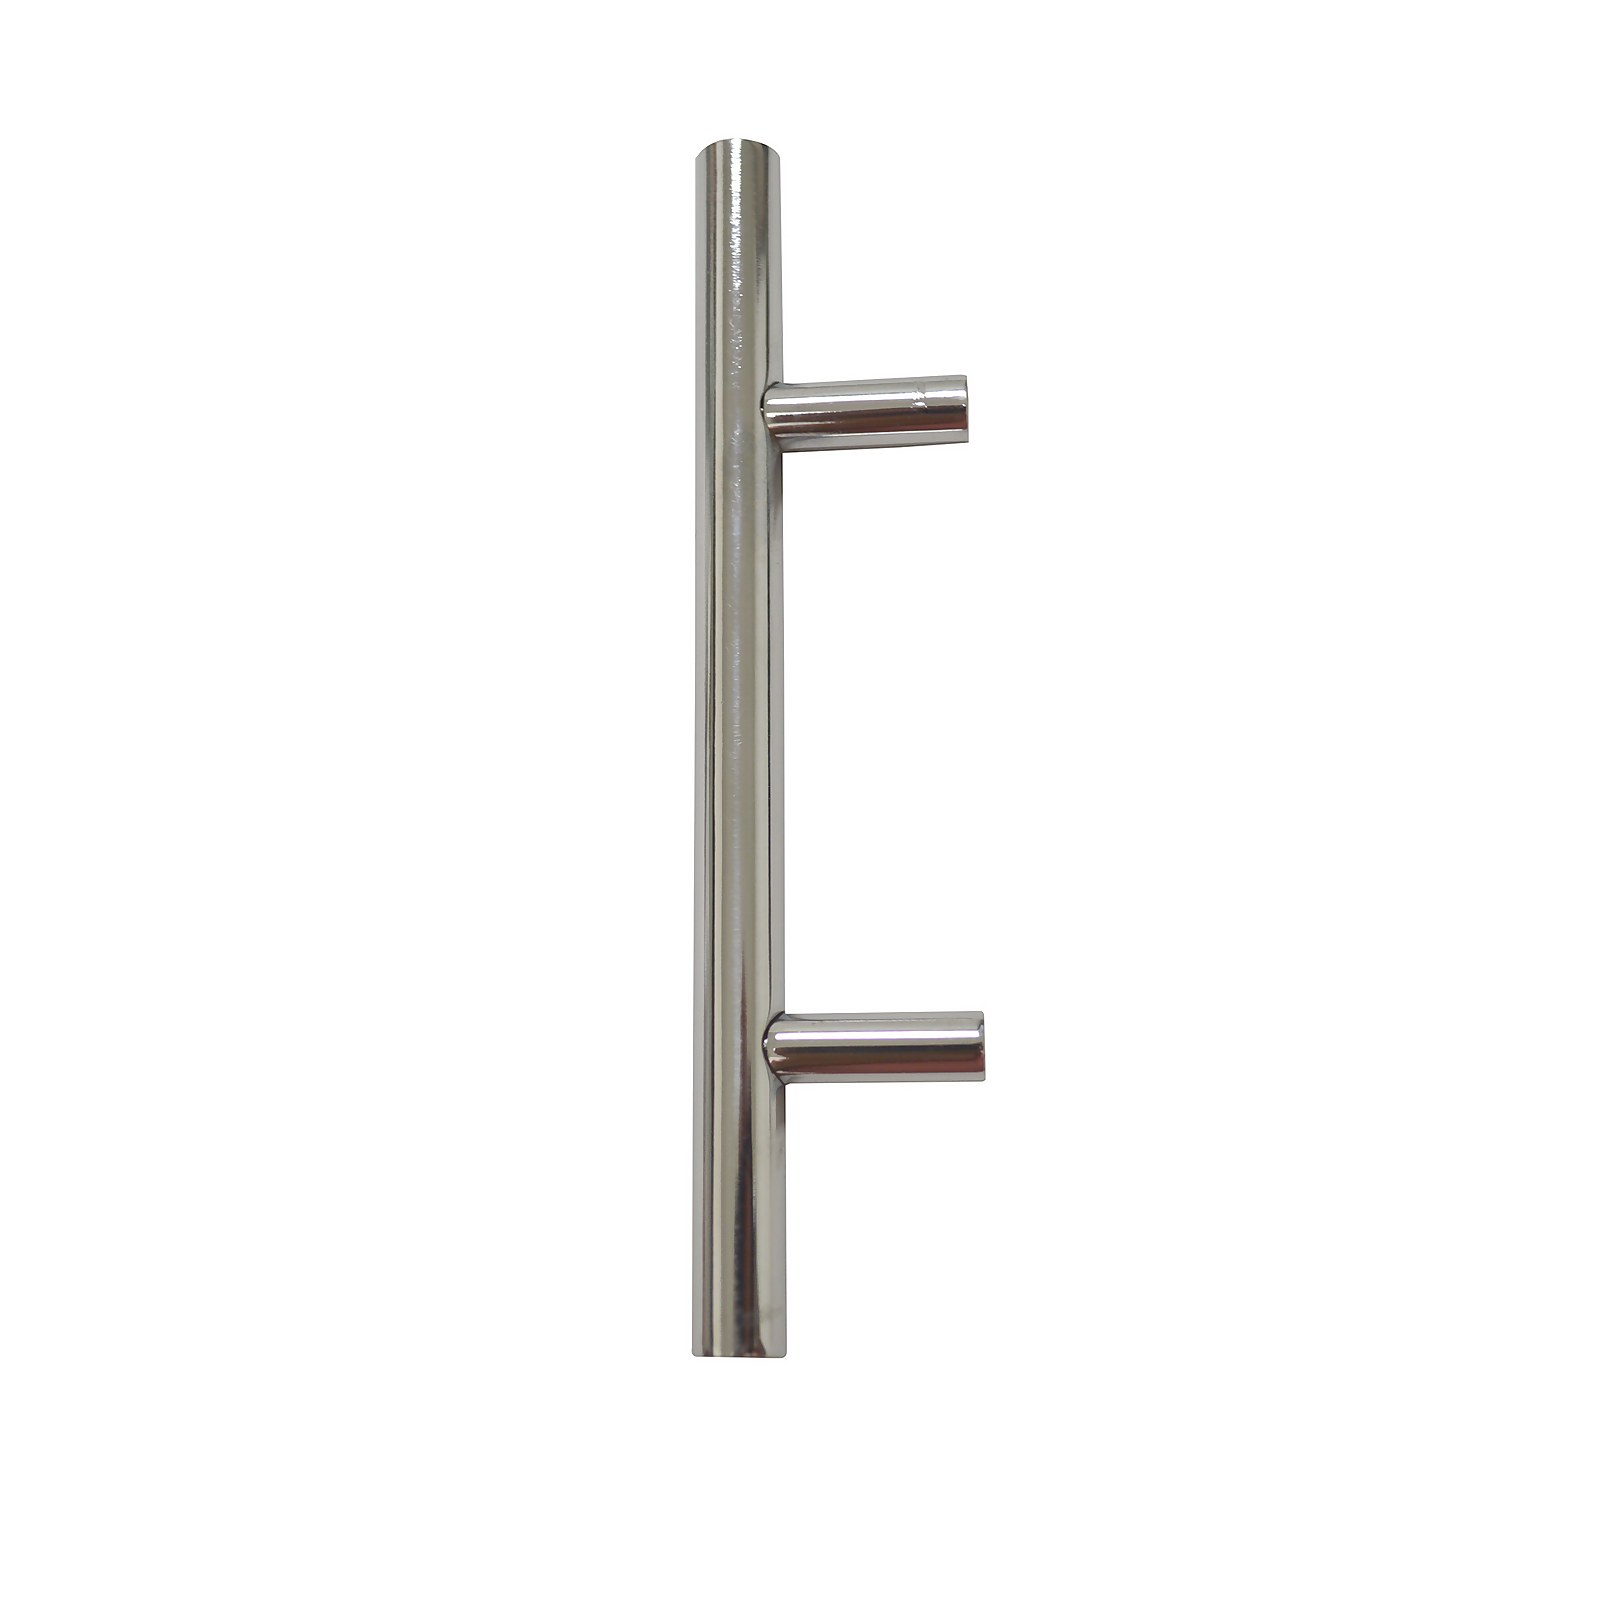 Photo of Lynton 64mm Steel T-bar Chrome Cabinet Handle - 2 Pack